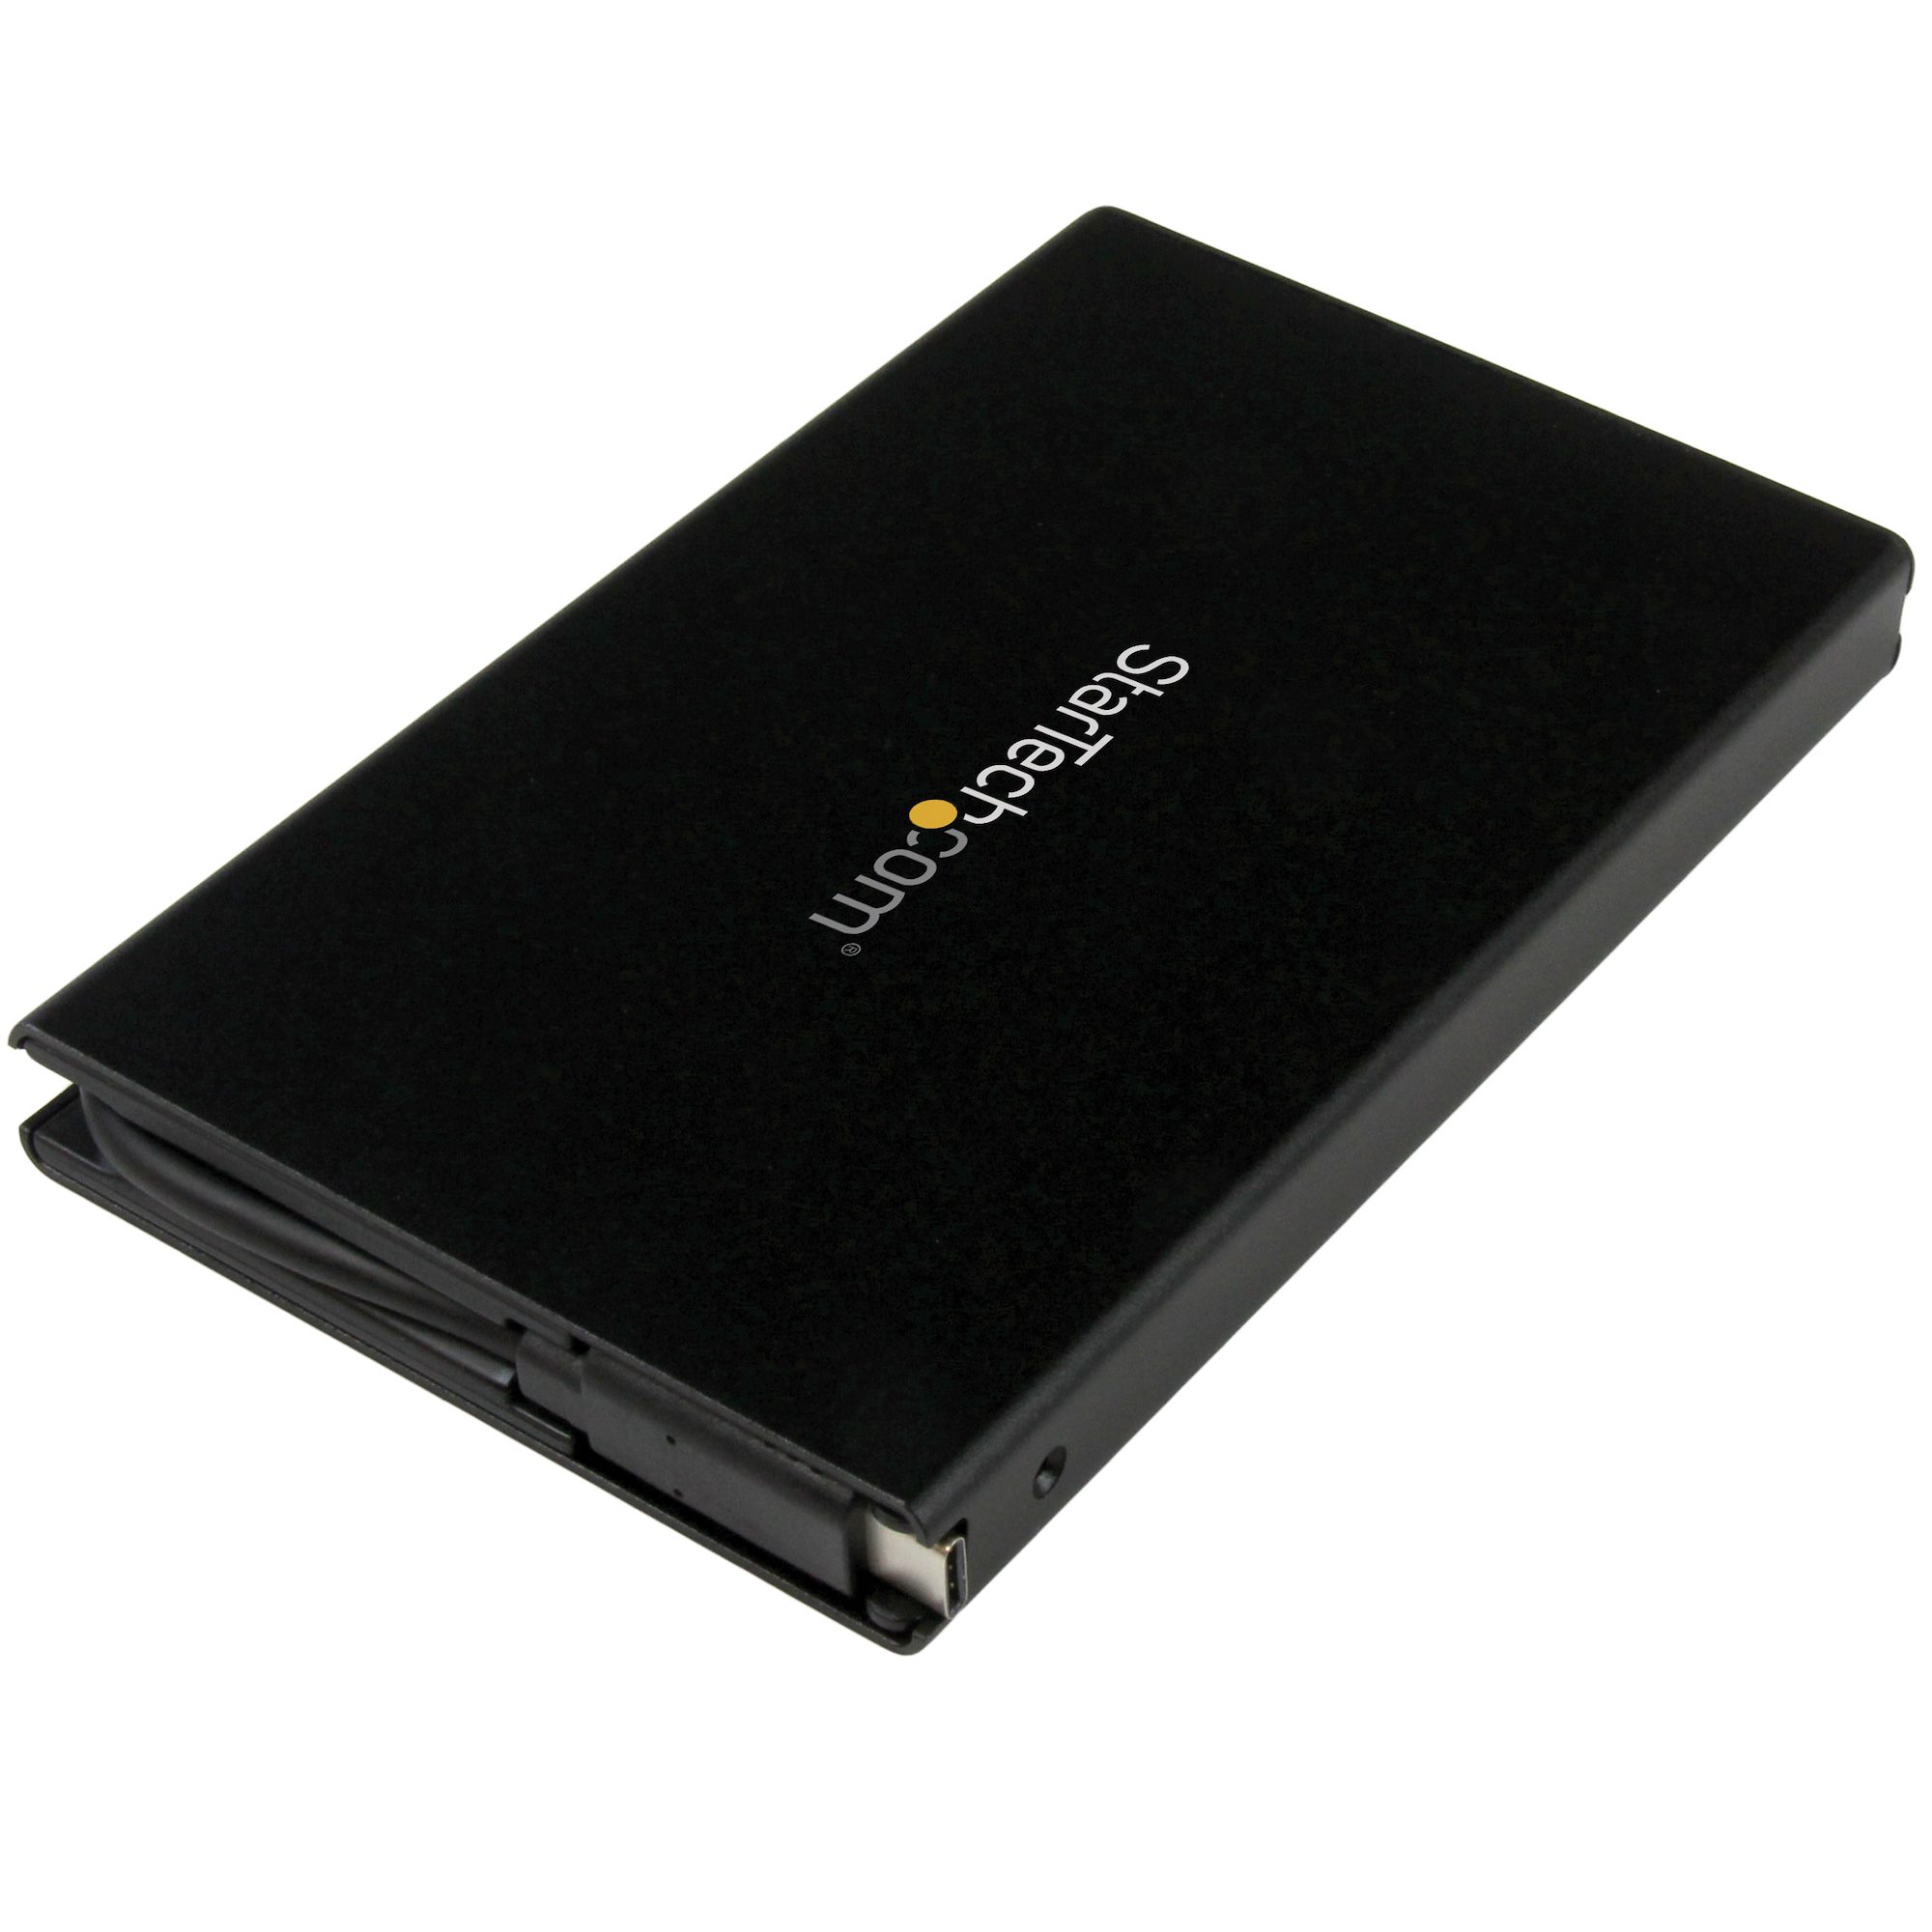 SHARGE Disk Tiny and Lightweight M.2 NVMe SSD Enclosure and Drive